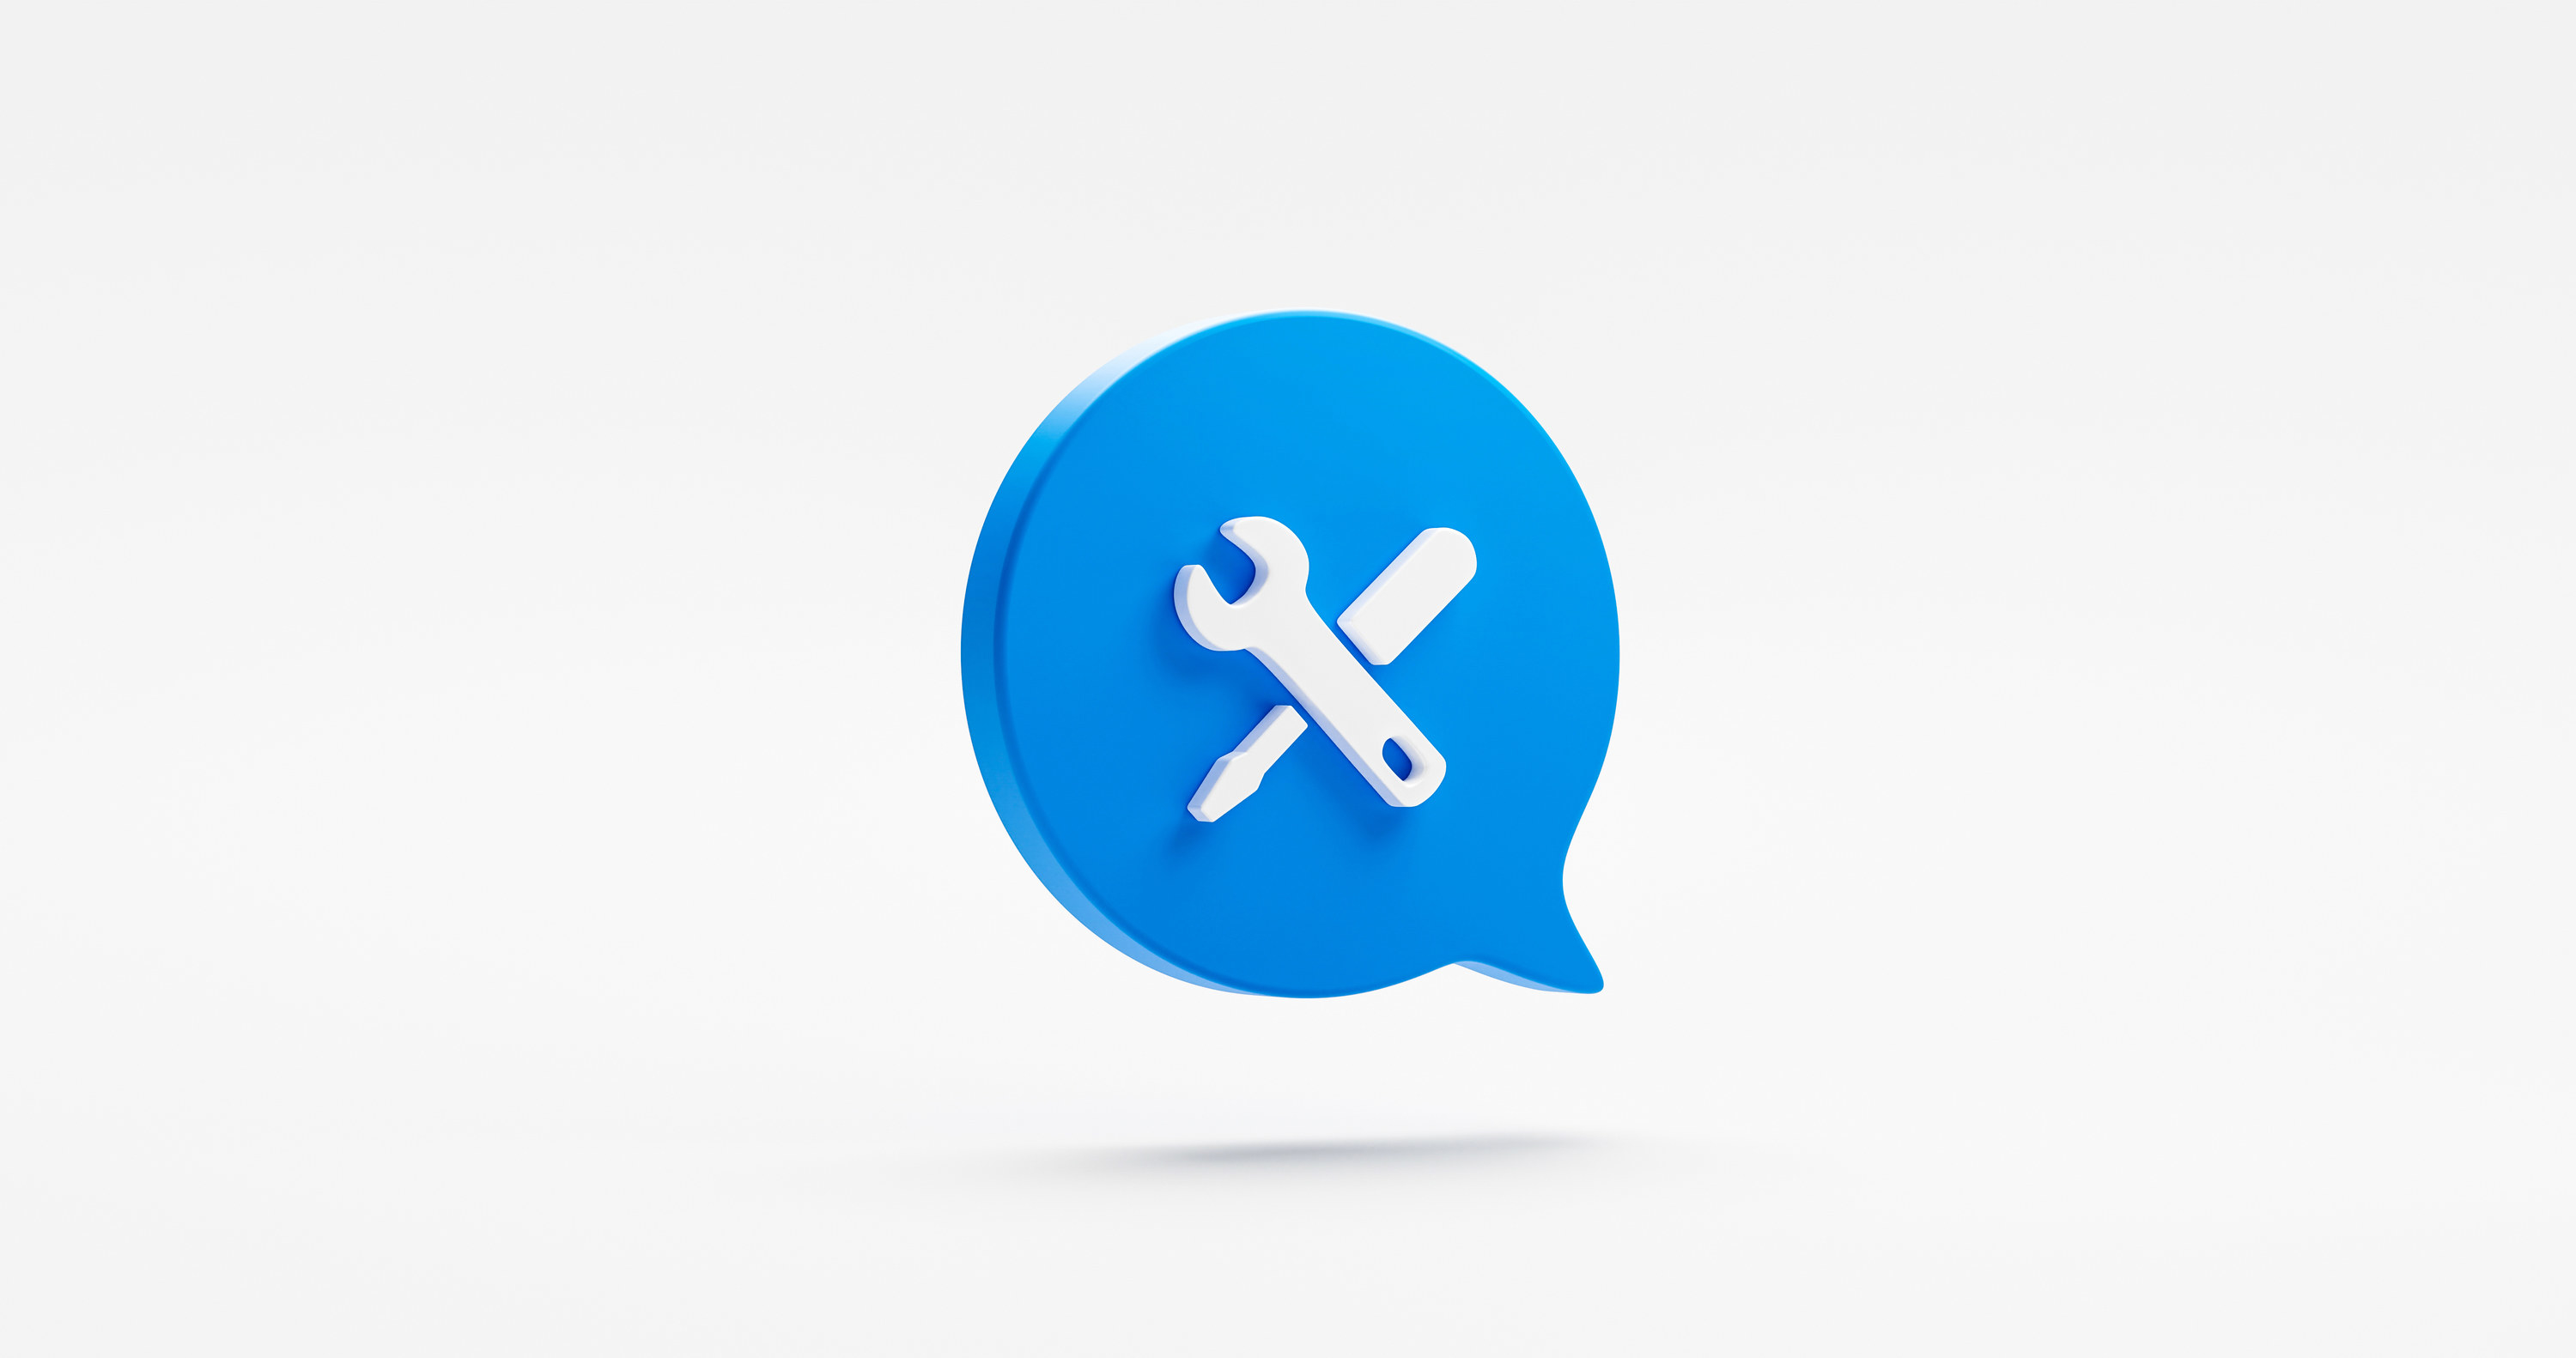 a blue speech bubble icon with a white screwdriver and spanner in it